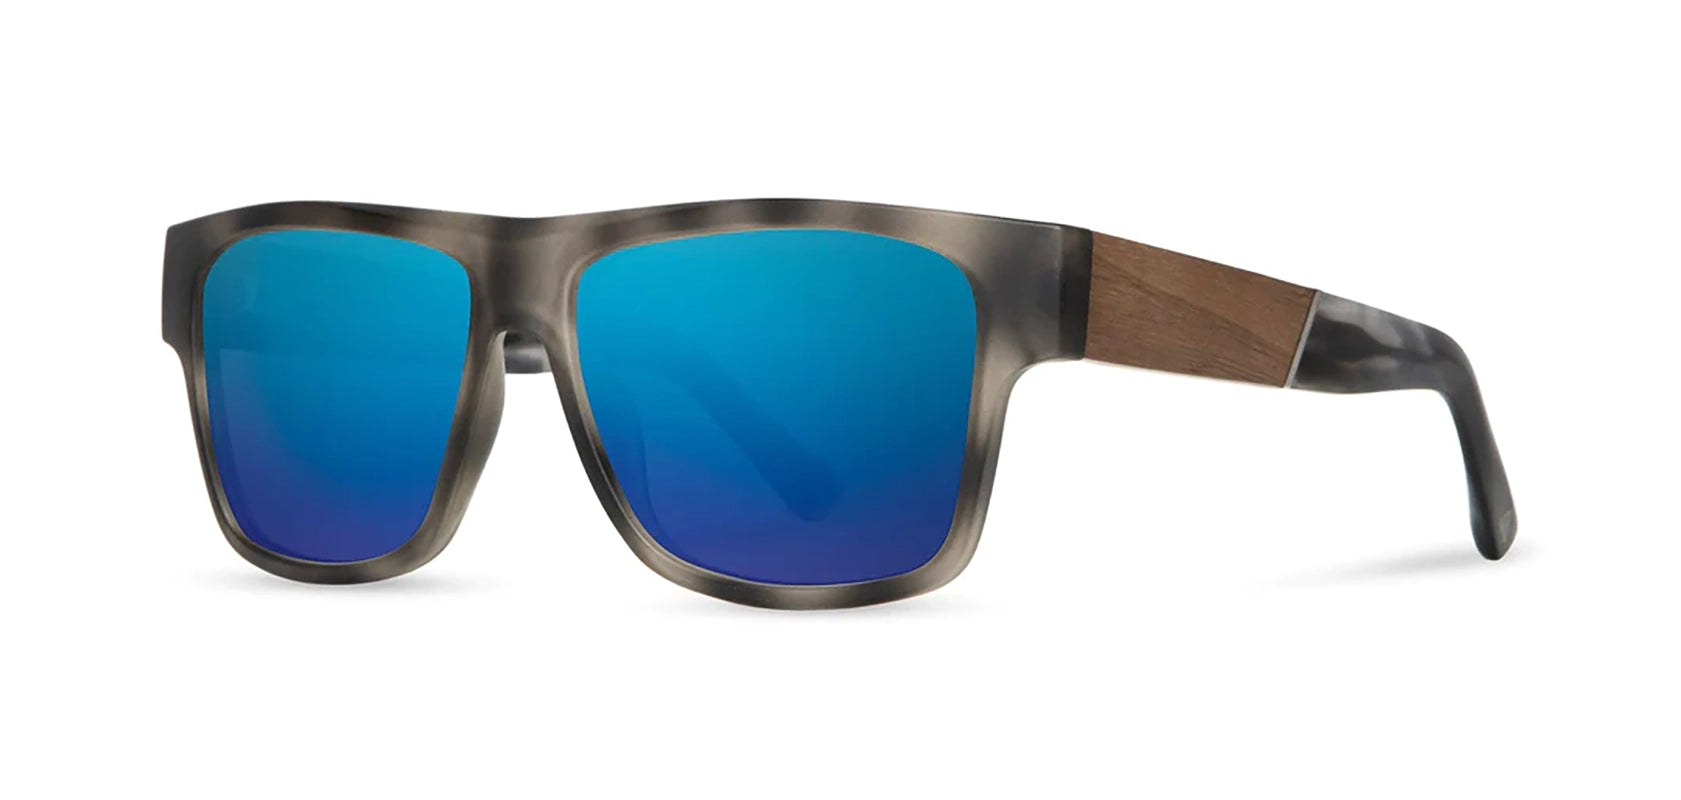 Shwood Camp- Cliff Sunglasses in Matte Grey Pearl / Walnut frames with HD polarized plus Blue Flash lenses, front angled view